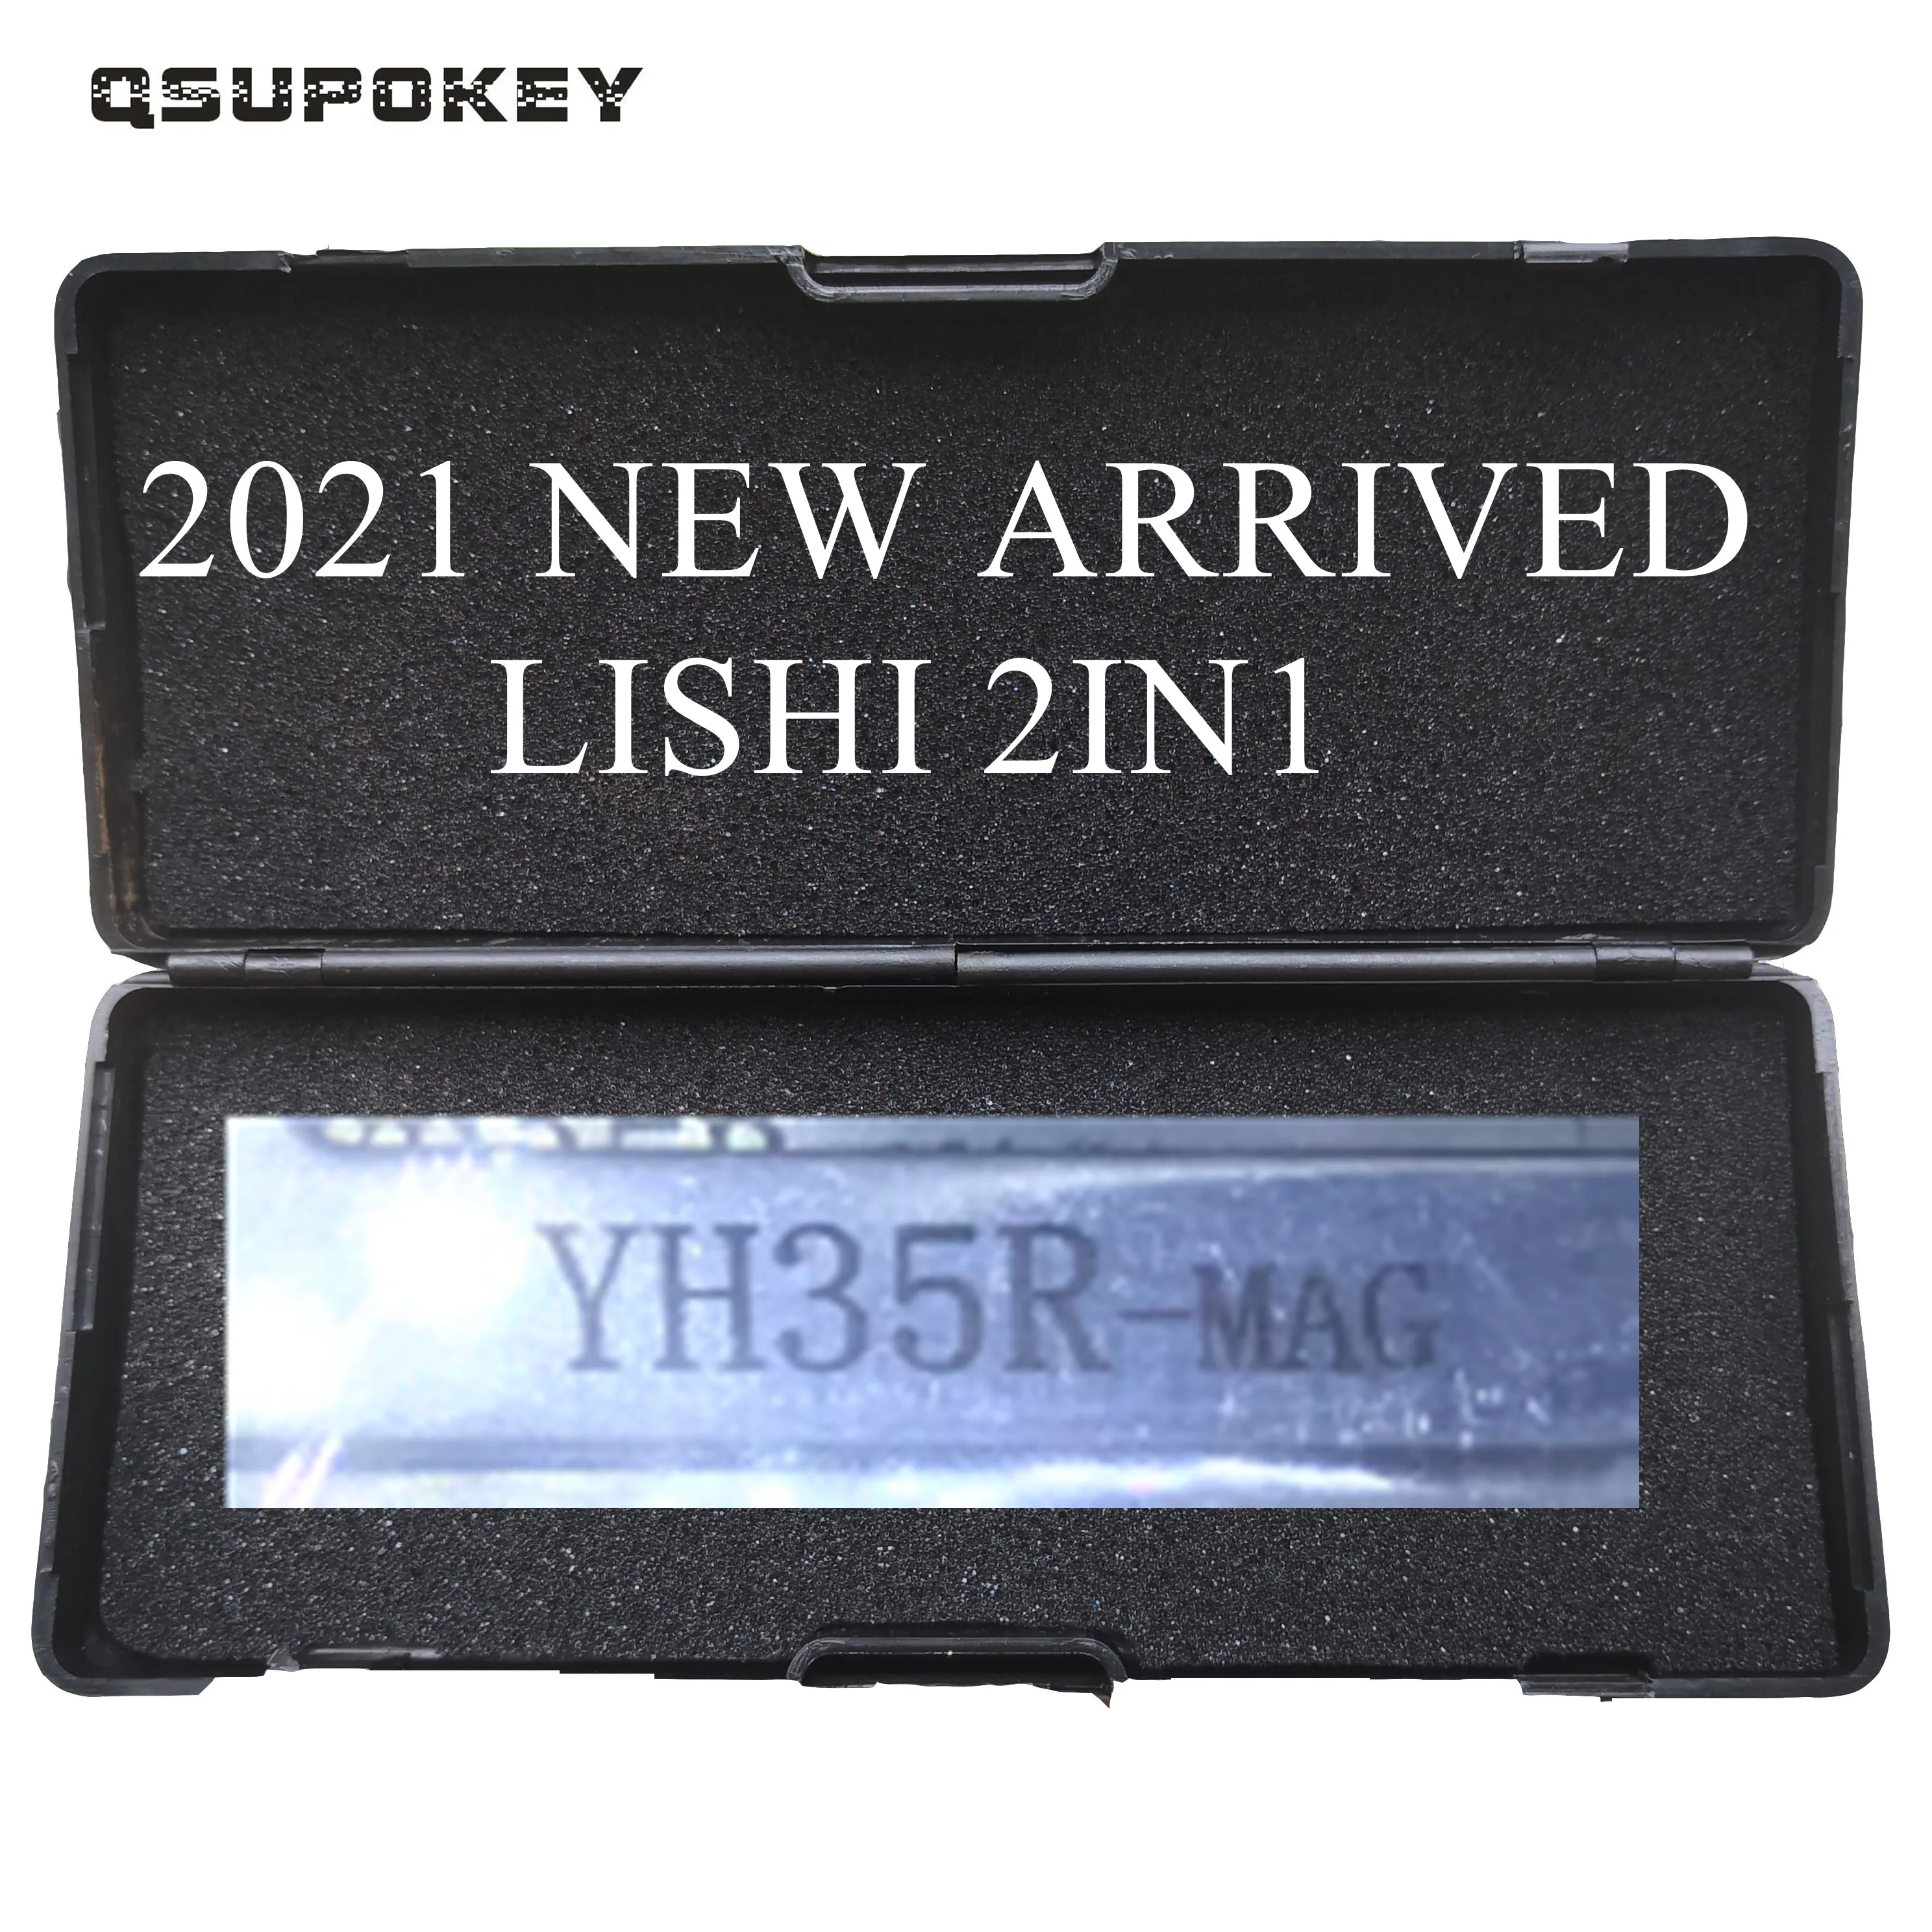 

QSUPOKEY 2021 NEW ARRIVED Original LiShi 2in1 repair Tool Locksmith Tools YH35R-MAG FOR YAMAHA with magetic gate Ignition Type